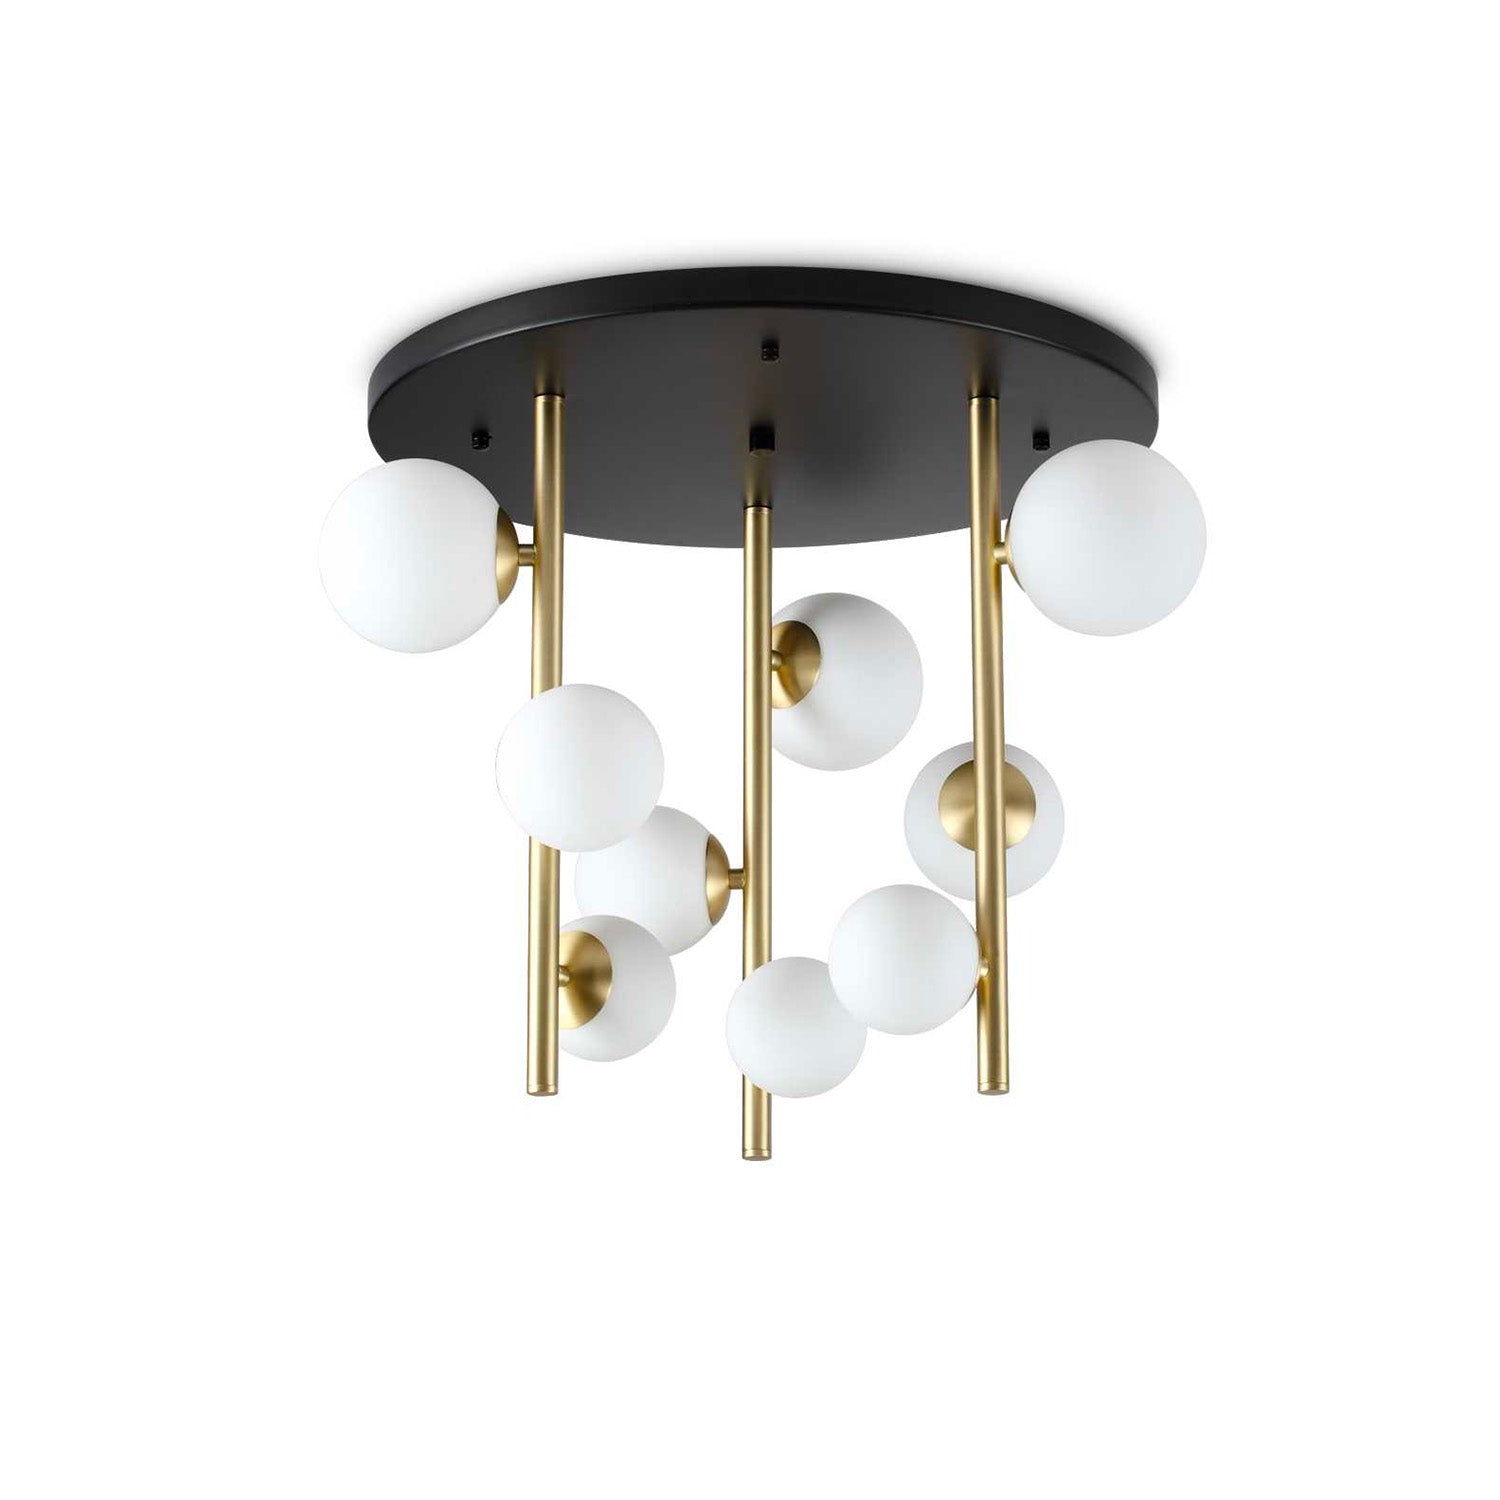 PERLAGE - Round ceiling light with glass balls